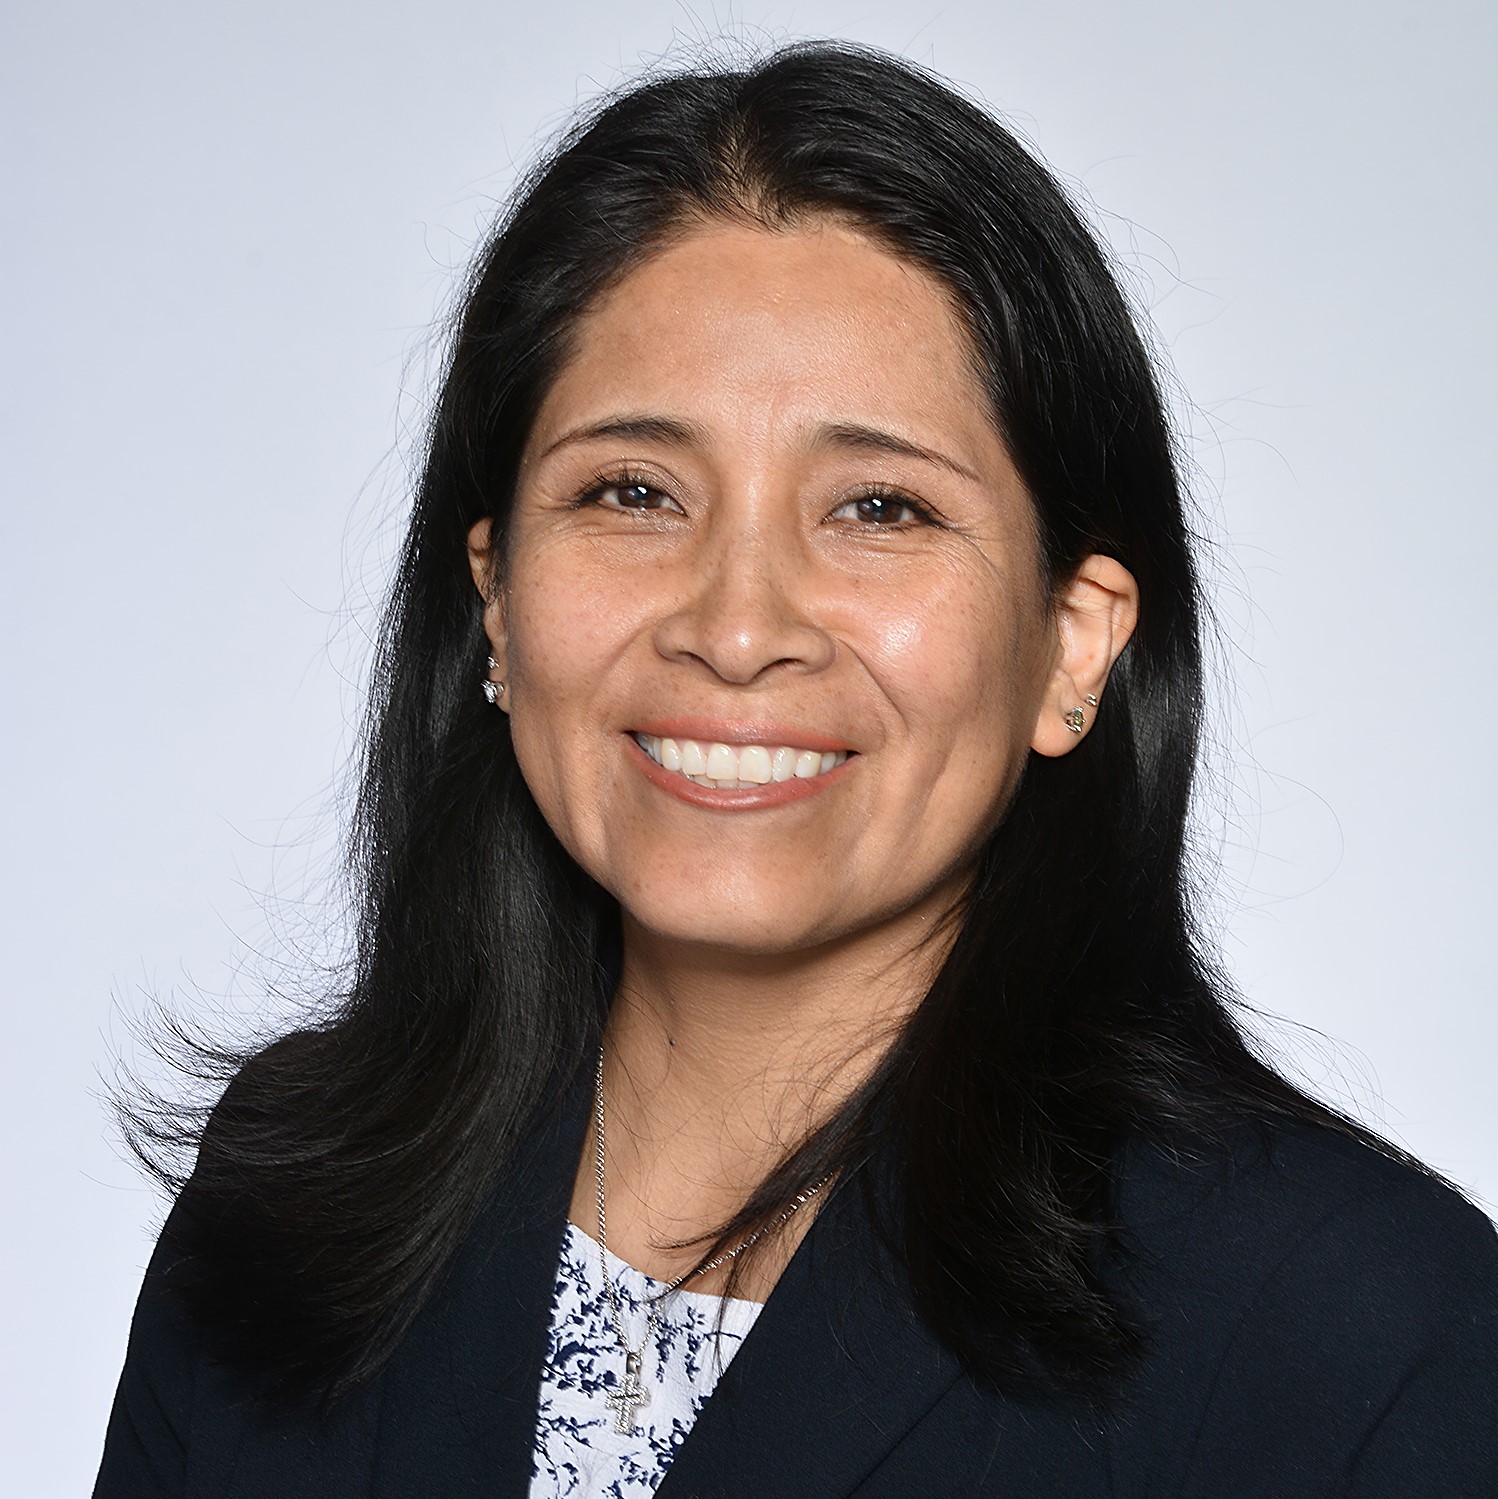 Martha Villalba Matamoros, new Americas-based Mining Consultant joins Whittle Consulting